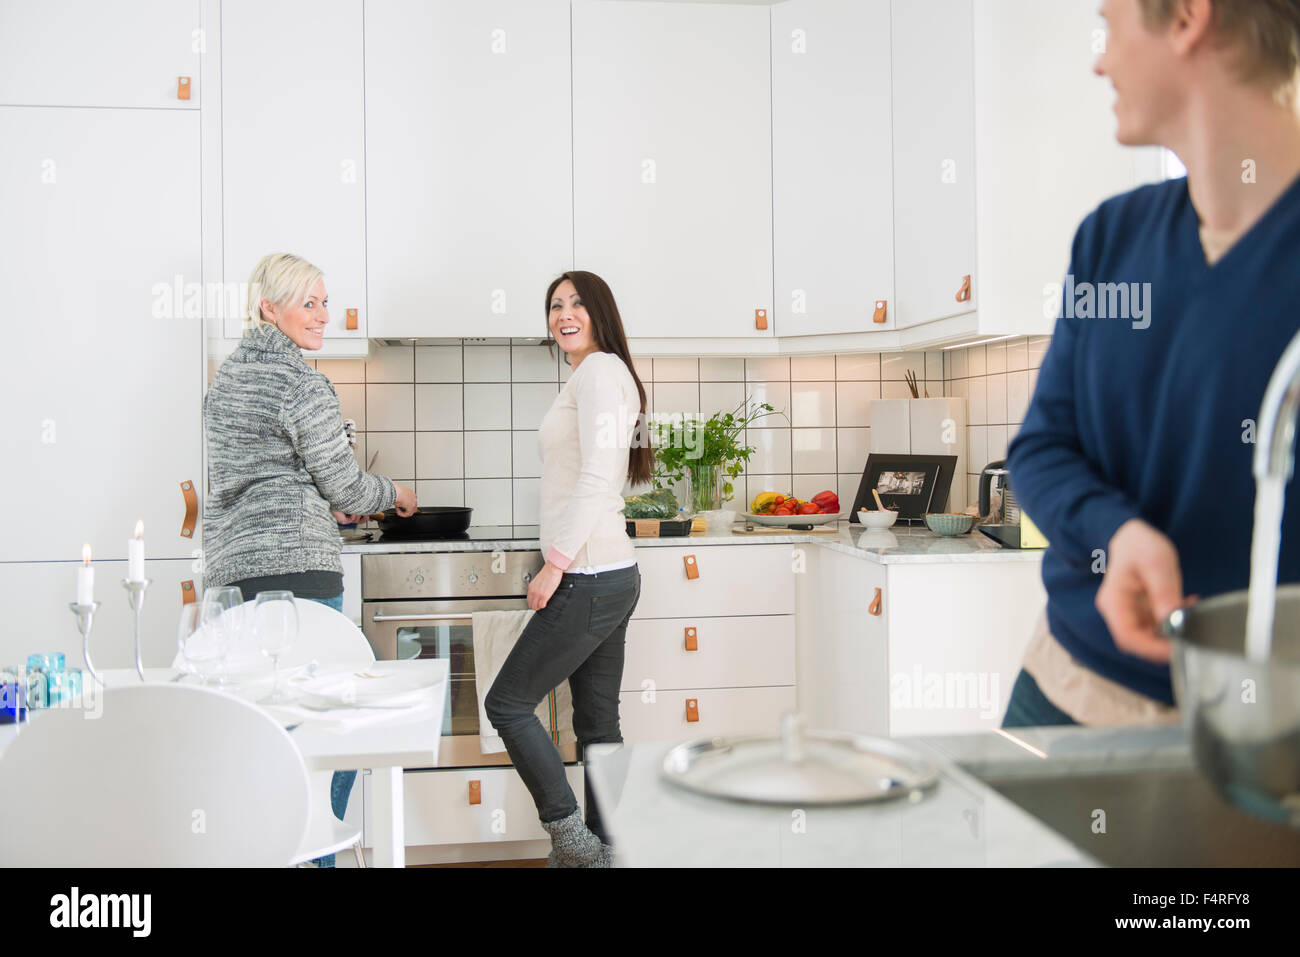 Two women and man in domestic kitchen Stock Photo